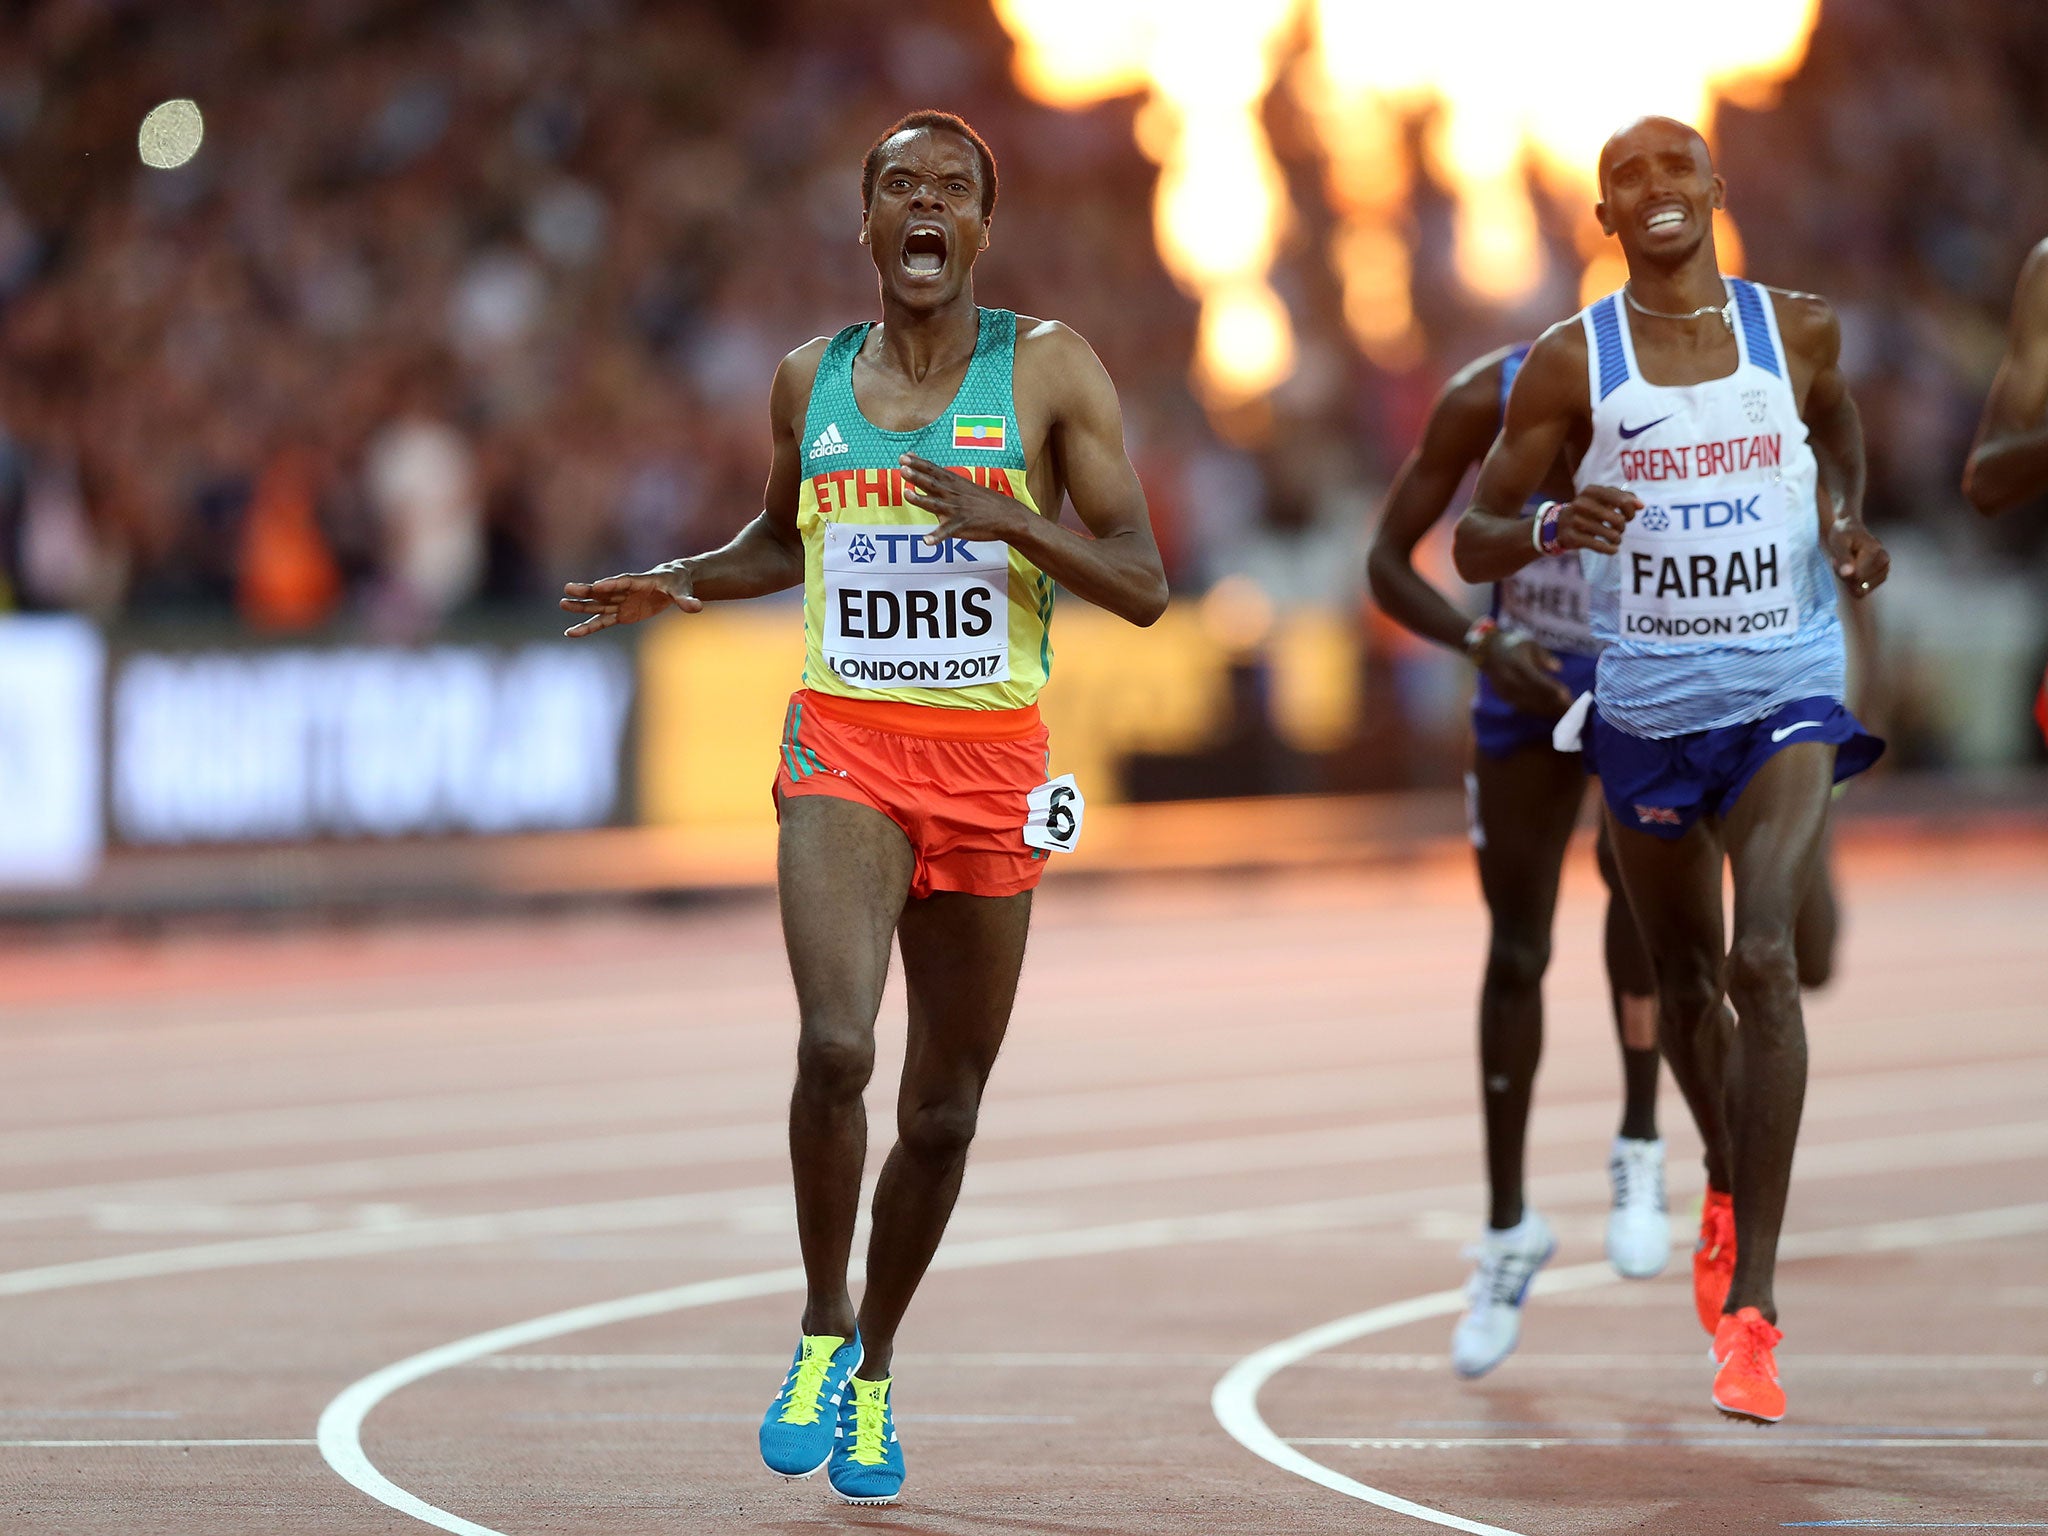 Mukhtar Edris edged out Mo Farah to victory in the 5,000m last summer